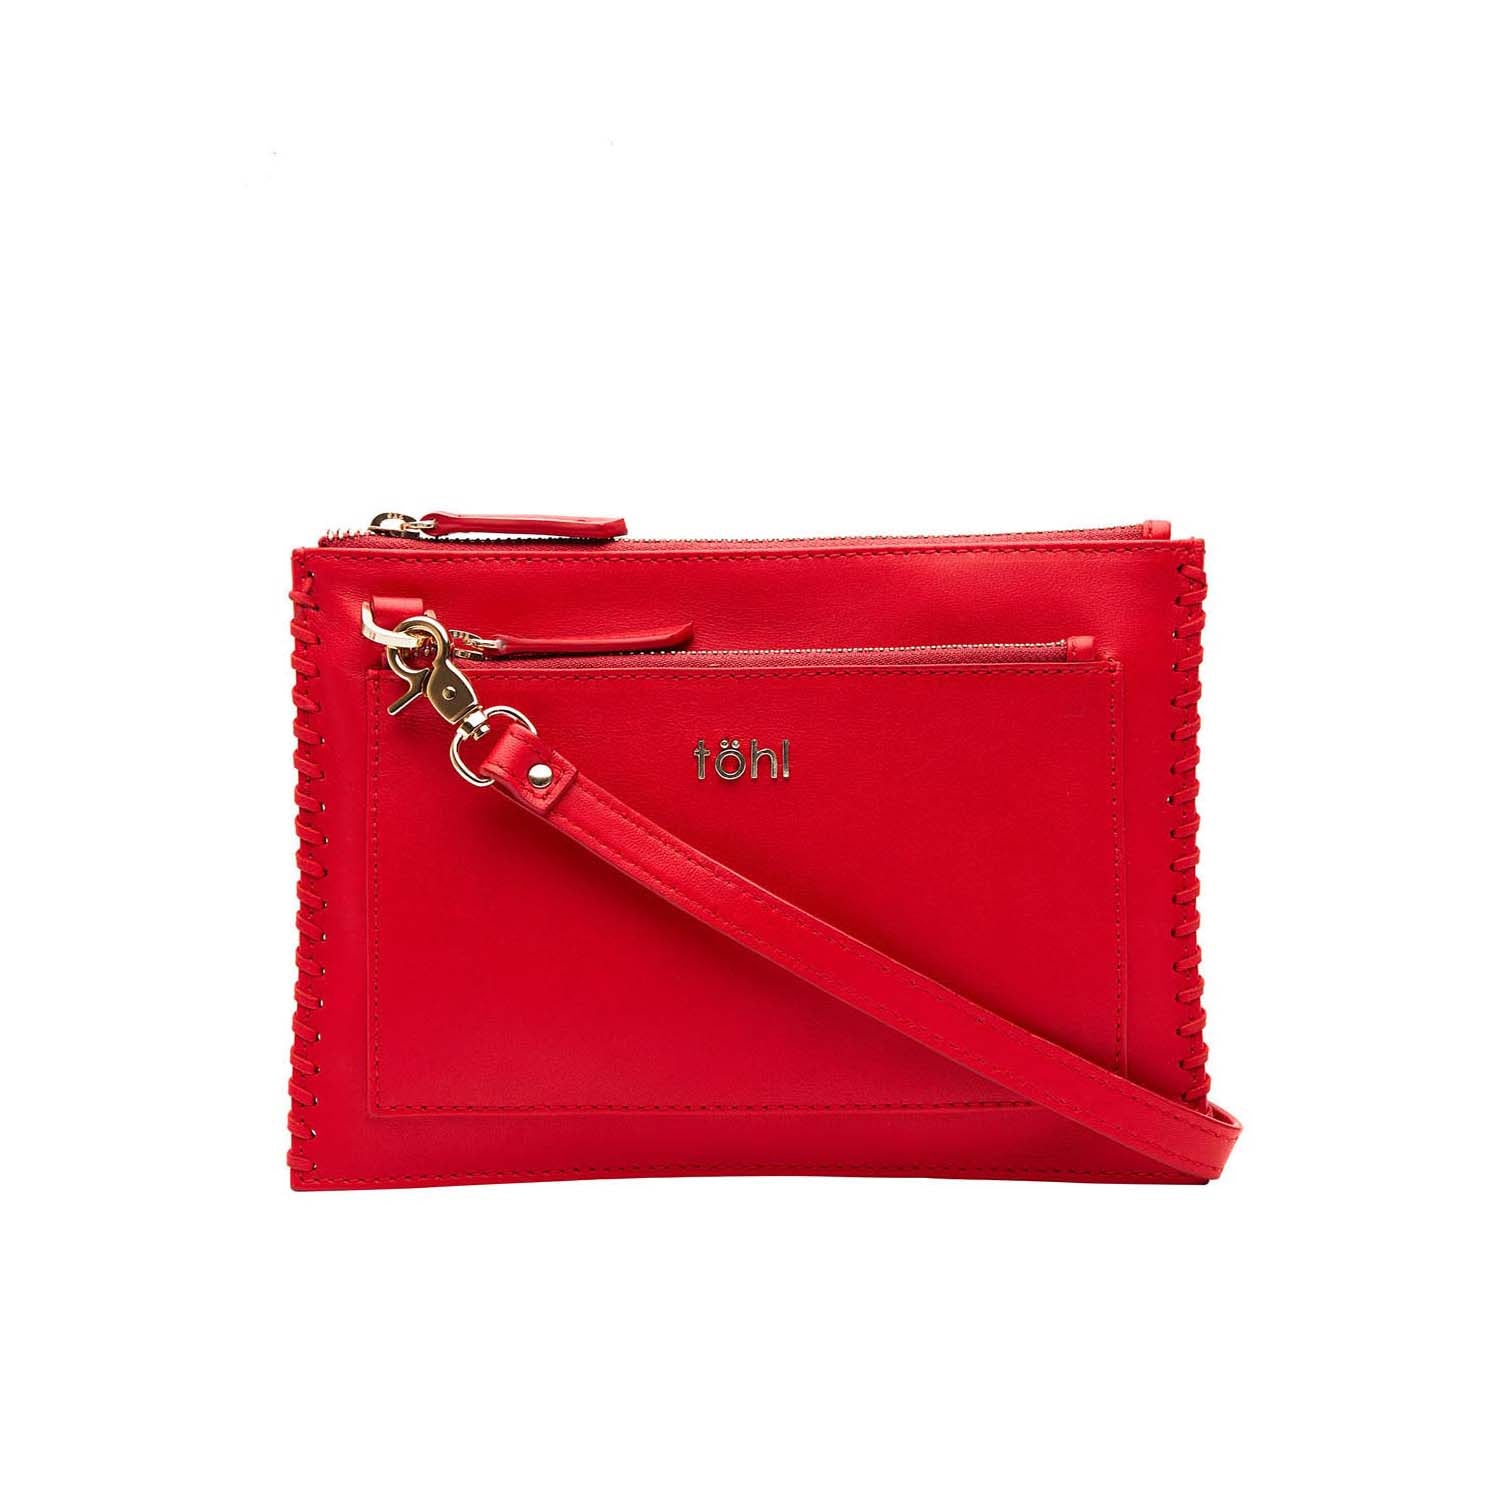 SG 0024 - TOHL ANMER WOMEN&#39;S SLING & CROSSBODY BAG - SPICE RED - tohl